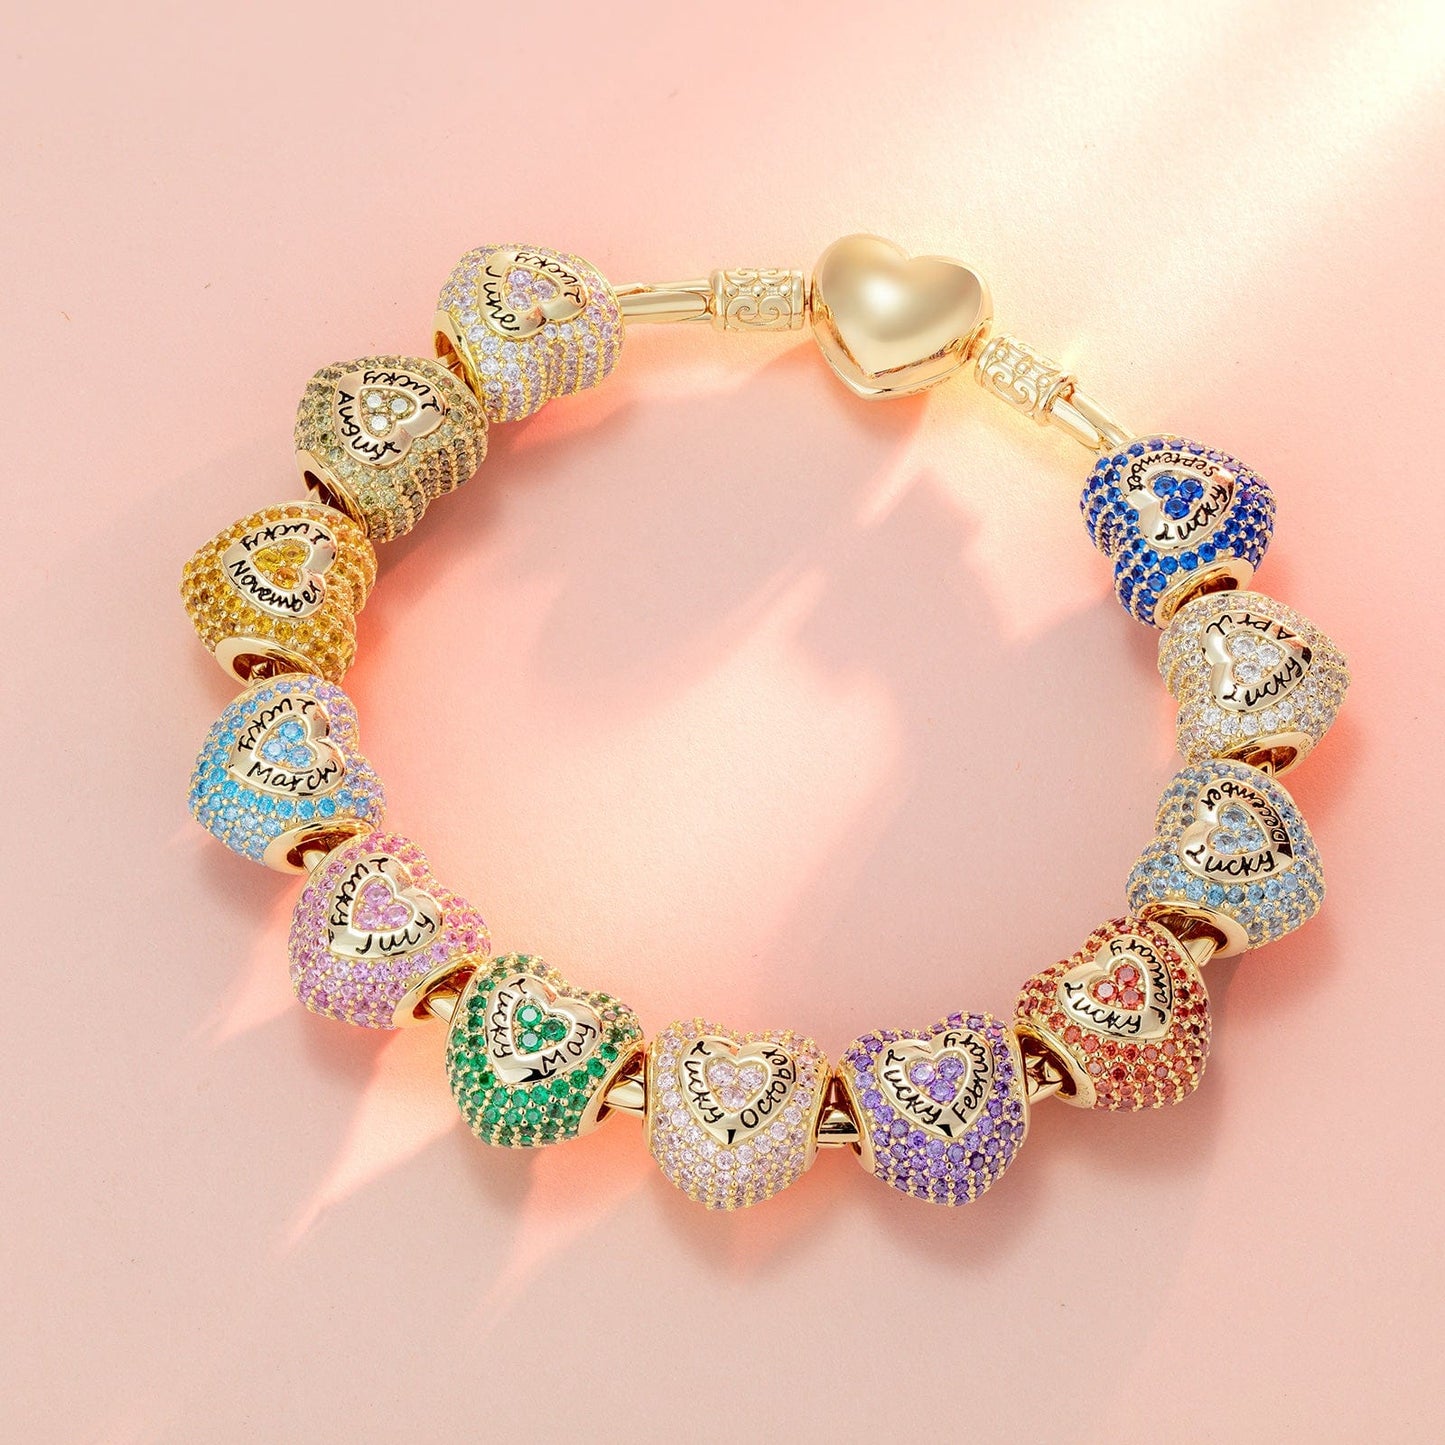 May Love Heart Birthstone Tarnish-resistant Silver Charms With Enamel In 14K Gold Plated